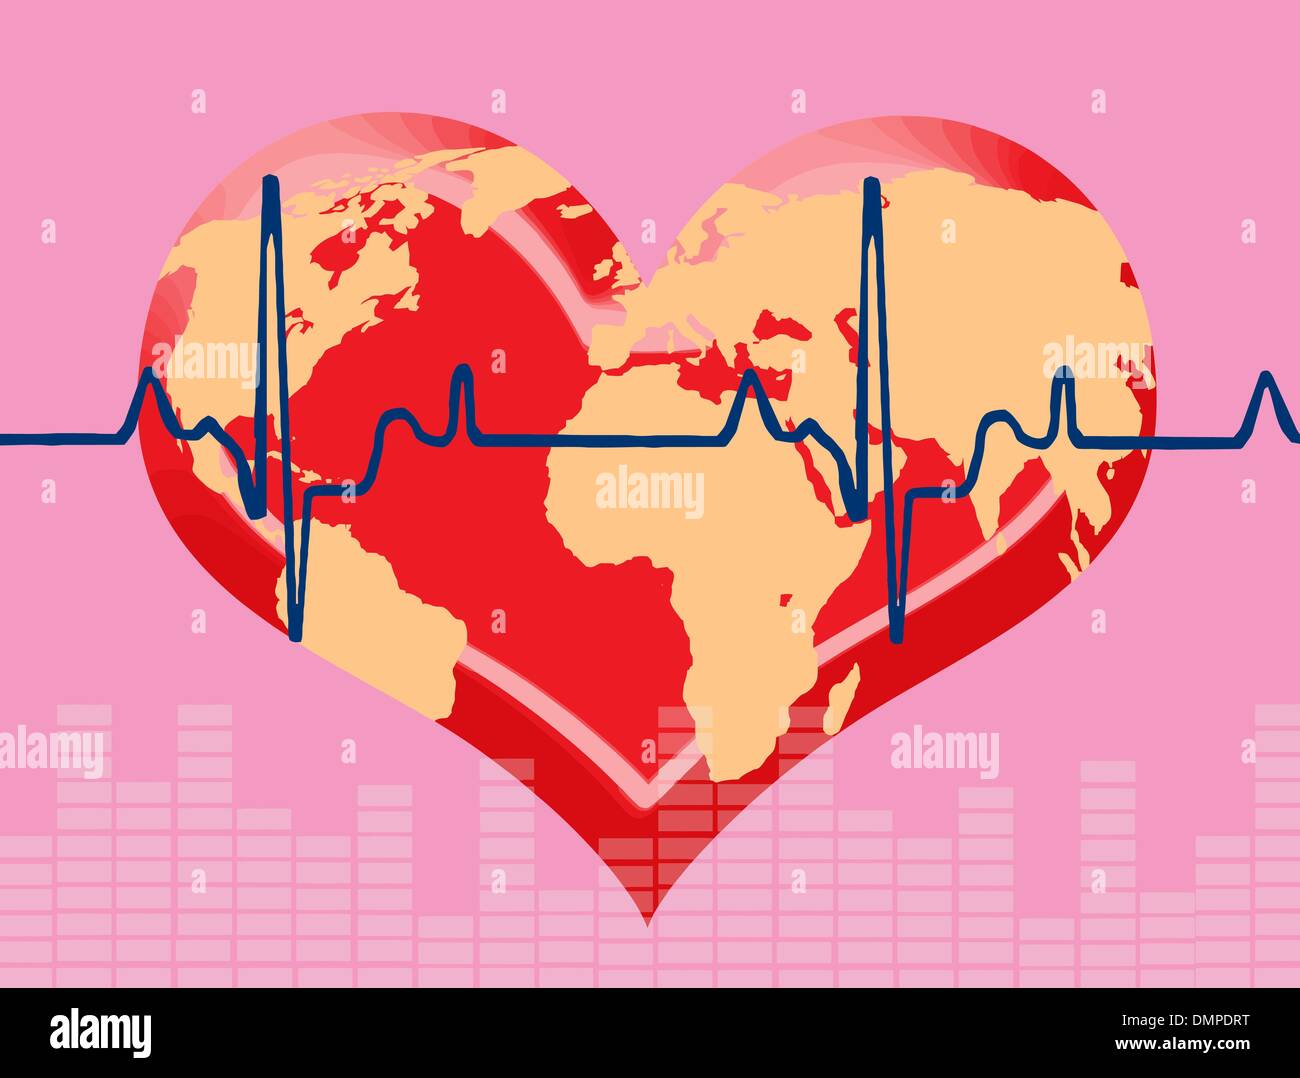 Heart and heartbeat symbol with world map Stock Vector